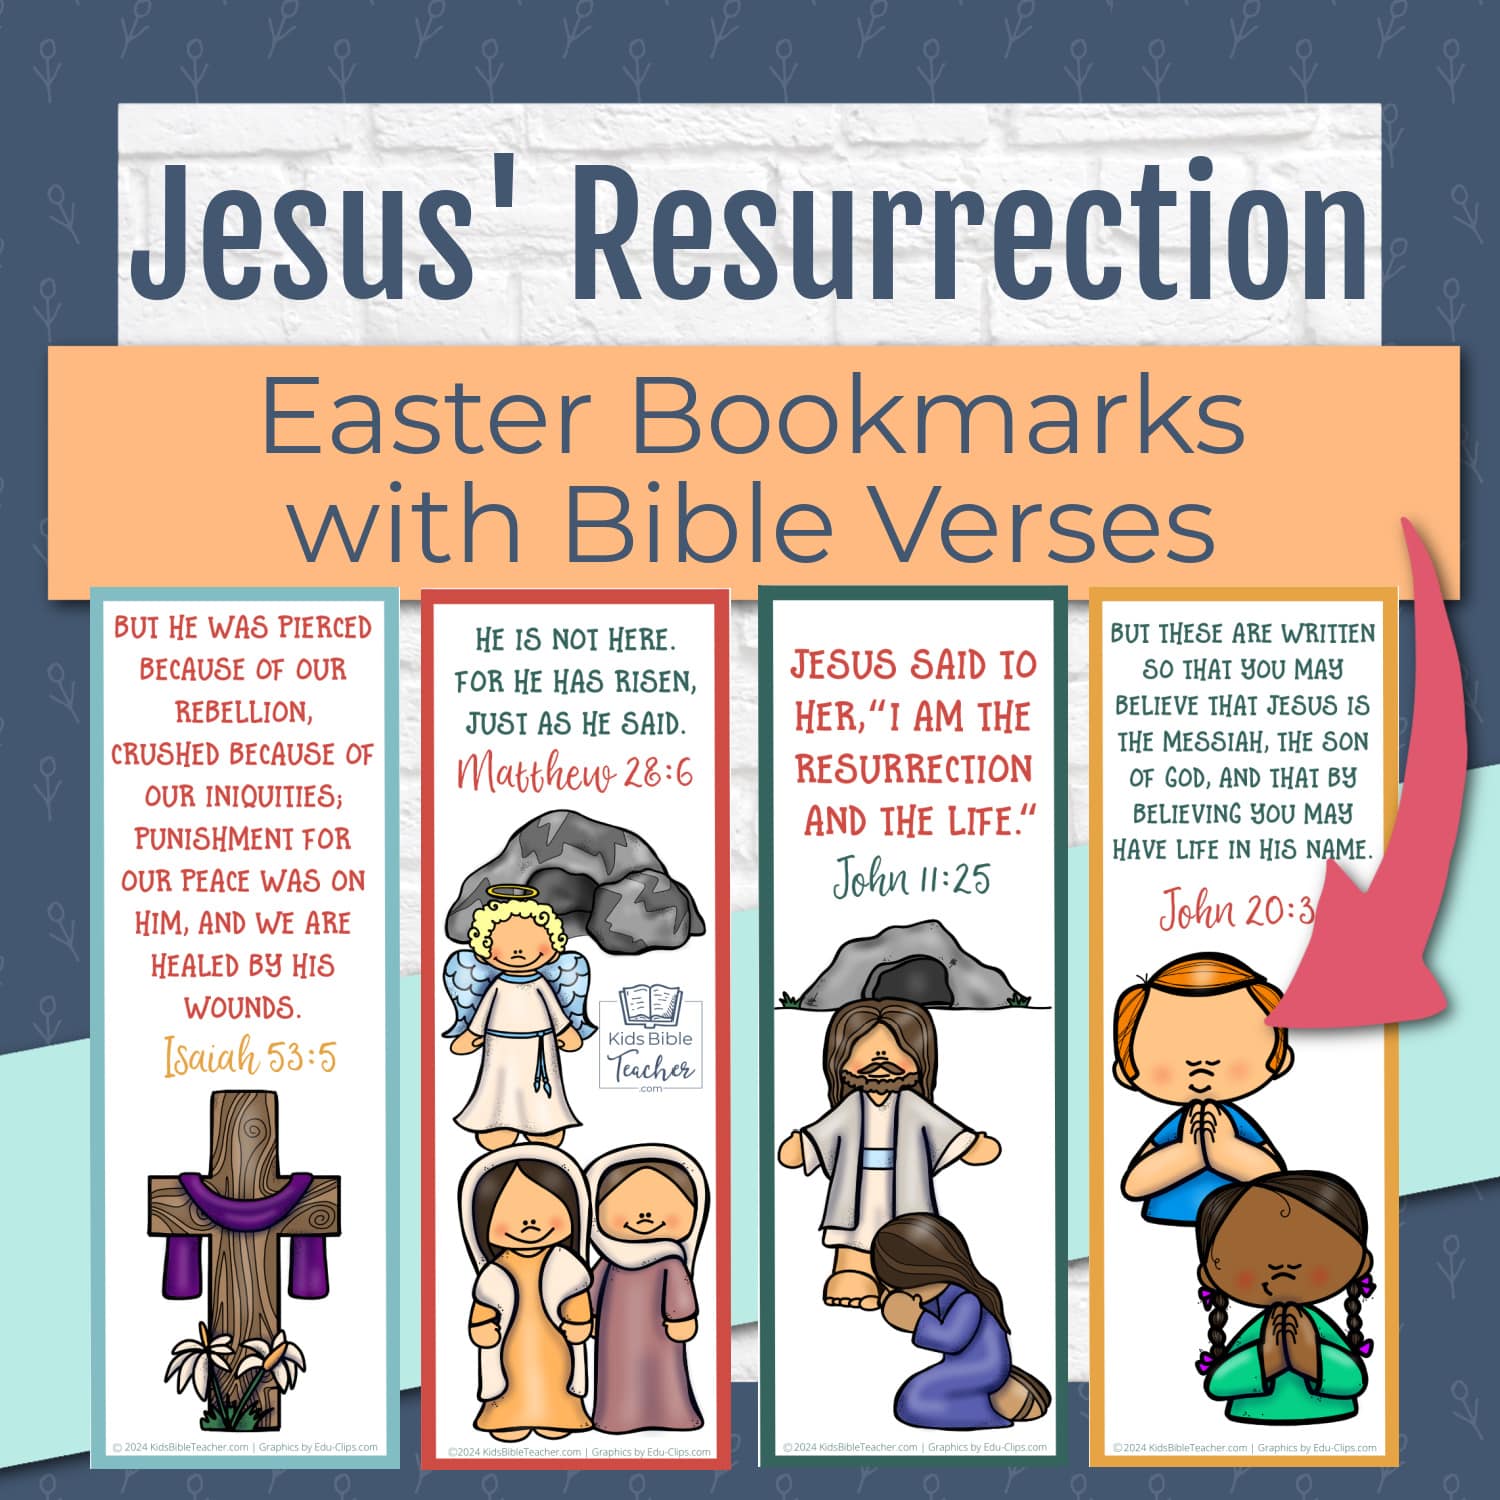 Cover image of Jesus' Resurrection Bookmarks showing all four bookmarks